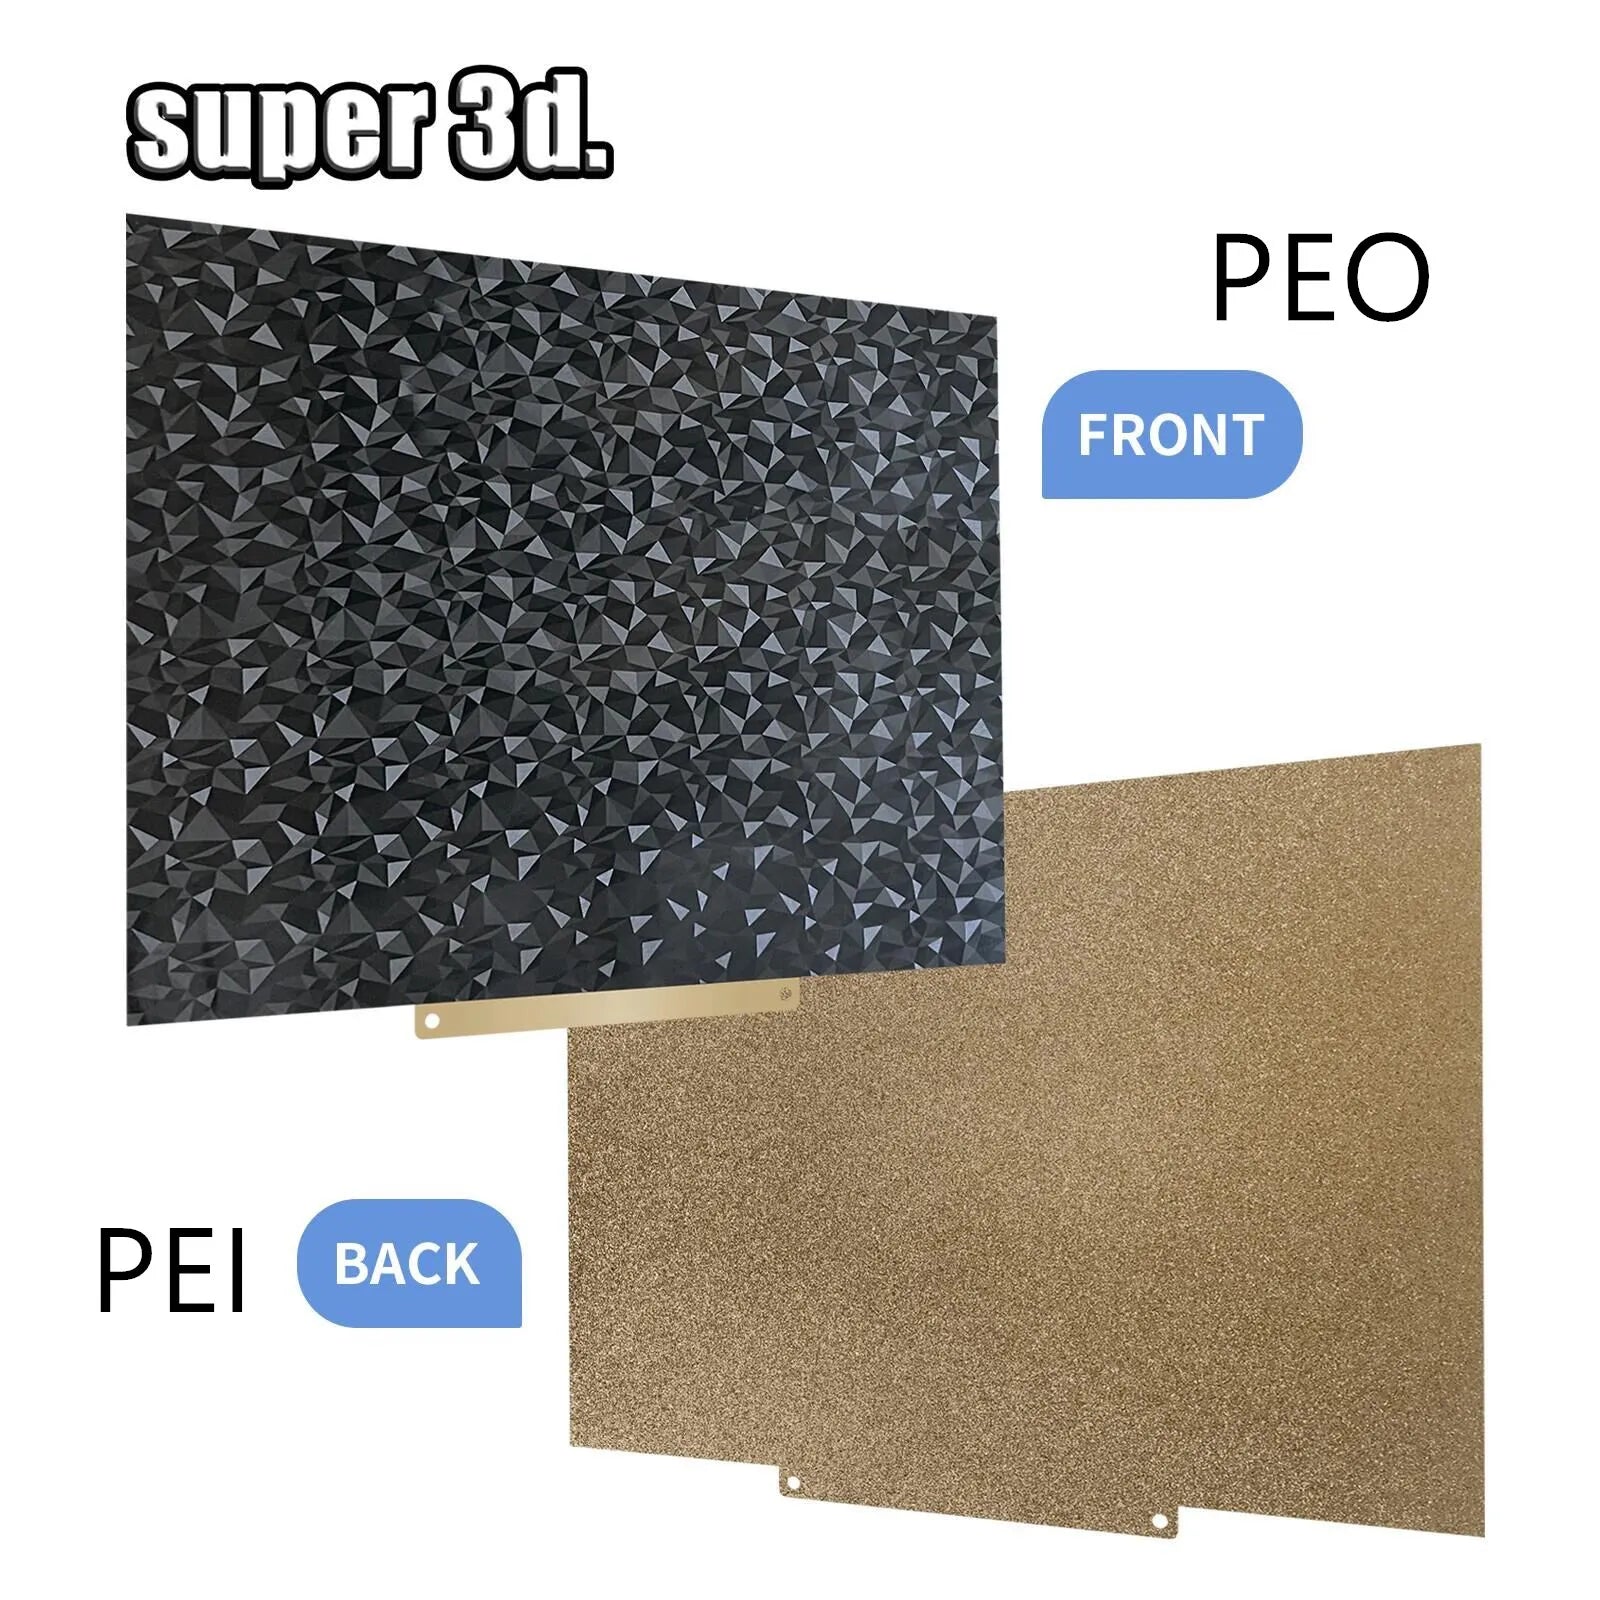 300/180/220/235/257/310mm PEO Sheet Magnetic Double Sided Steel Sheet PEI For K1 ender 3 Upgrade CR10 Ghost6 p1p PEO bulid plate